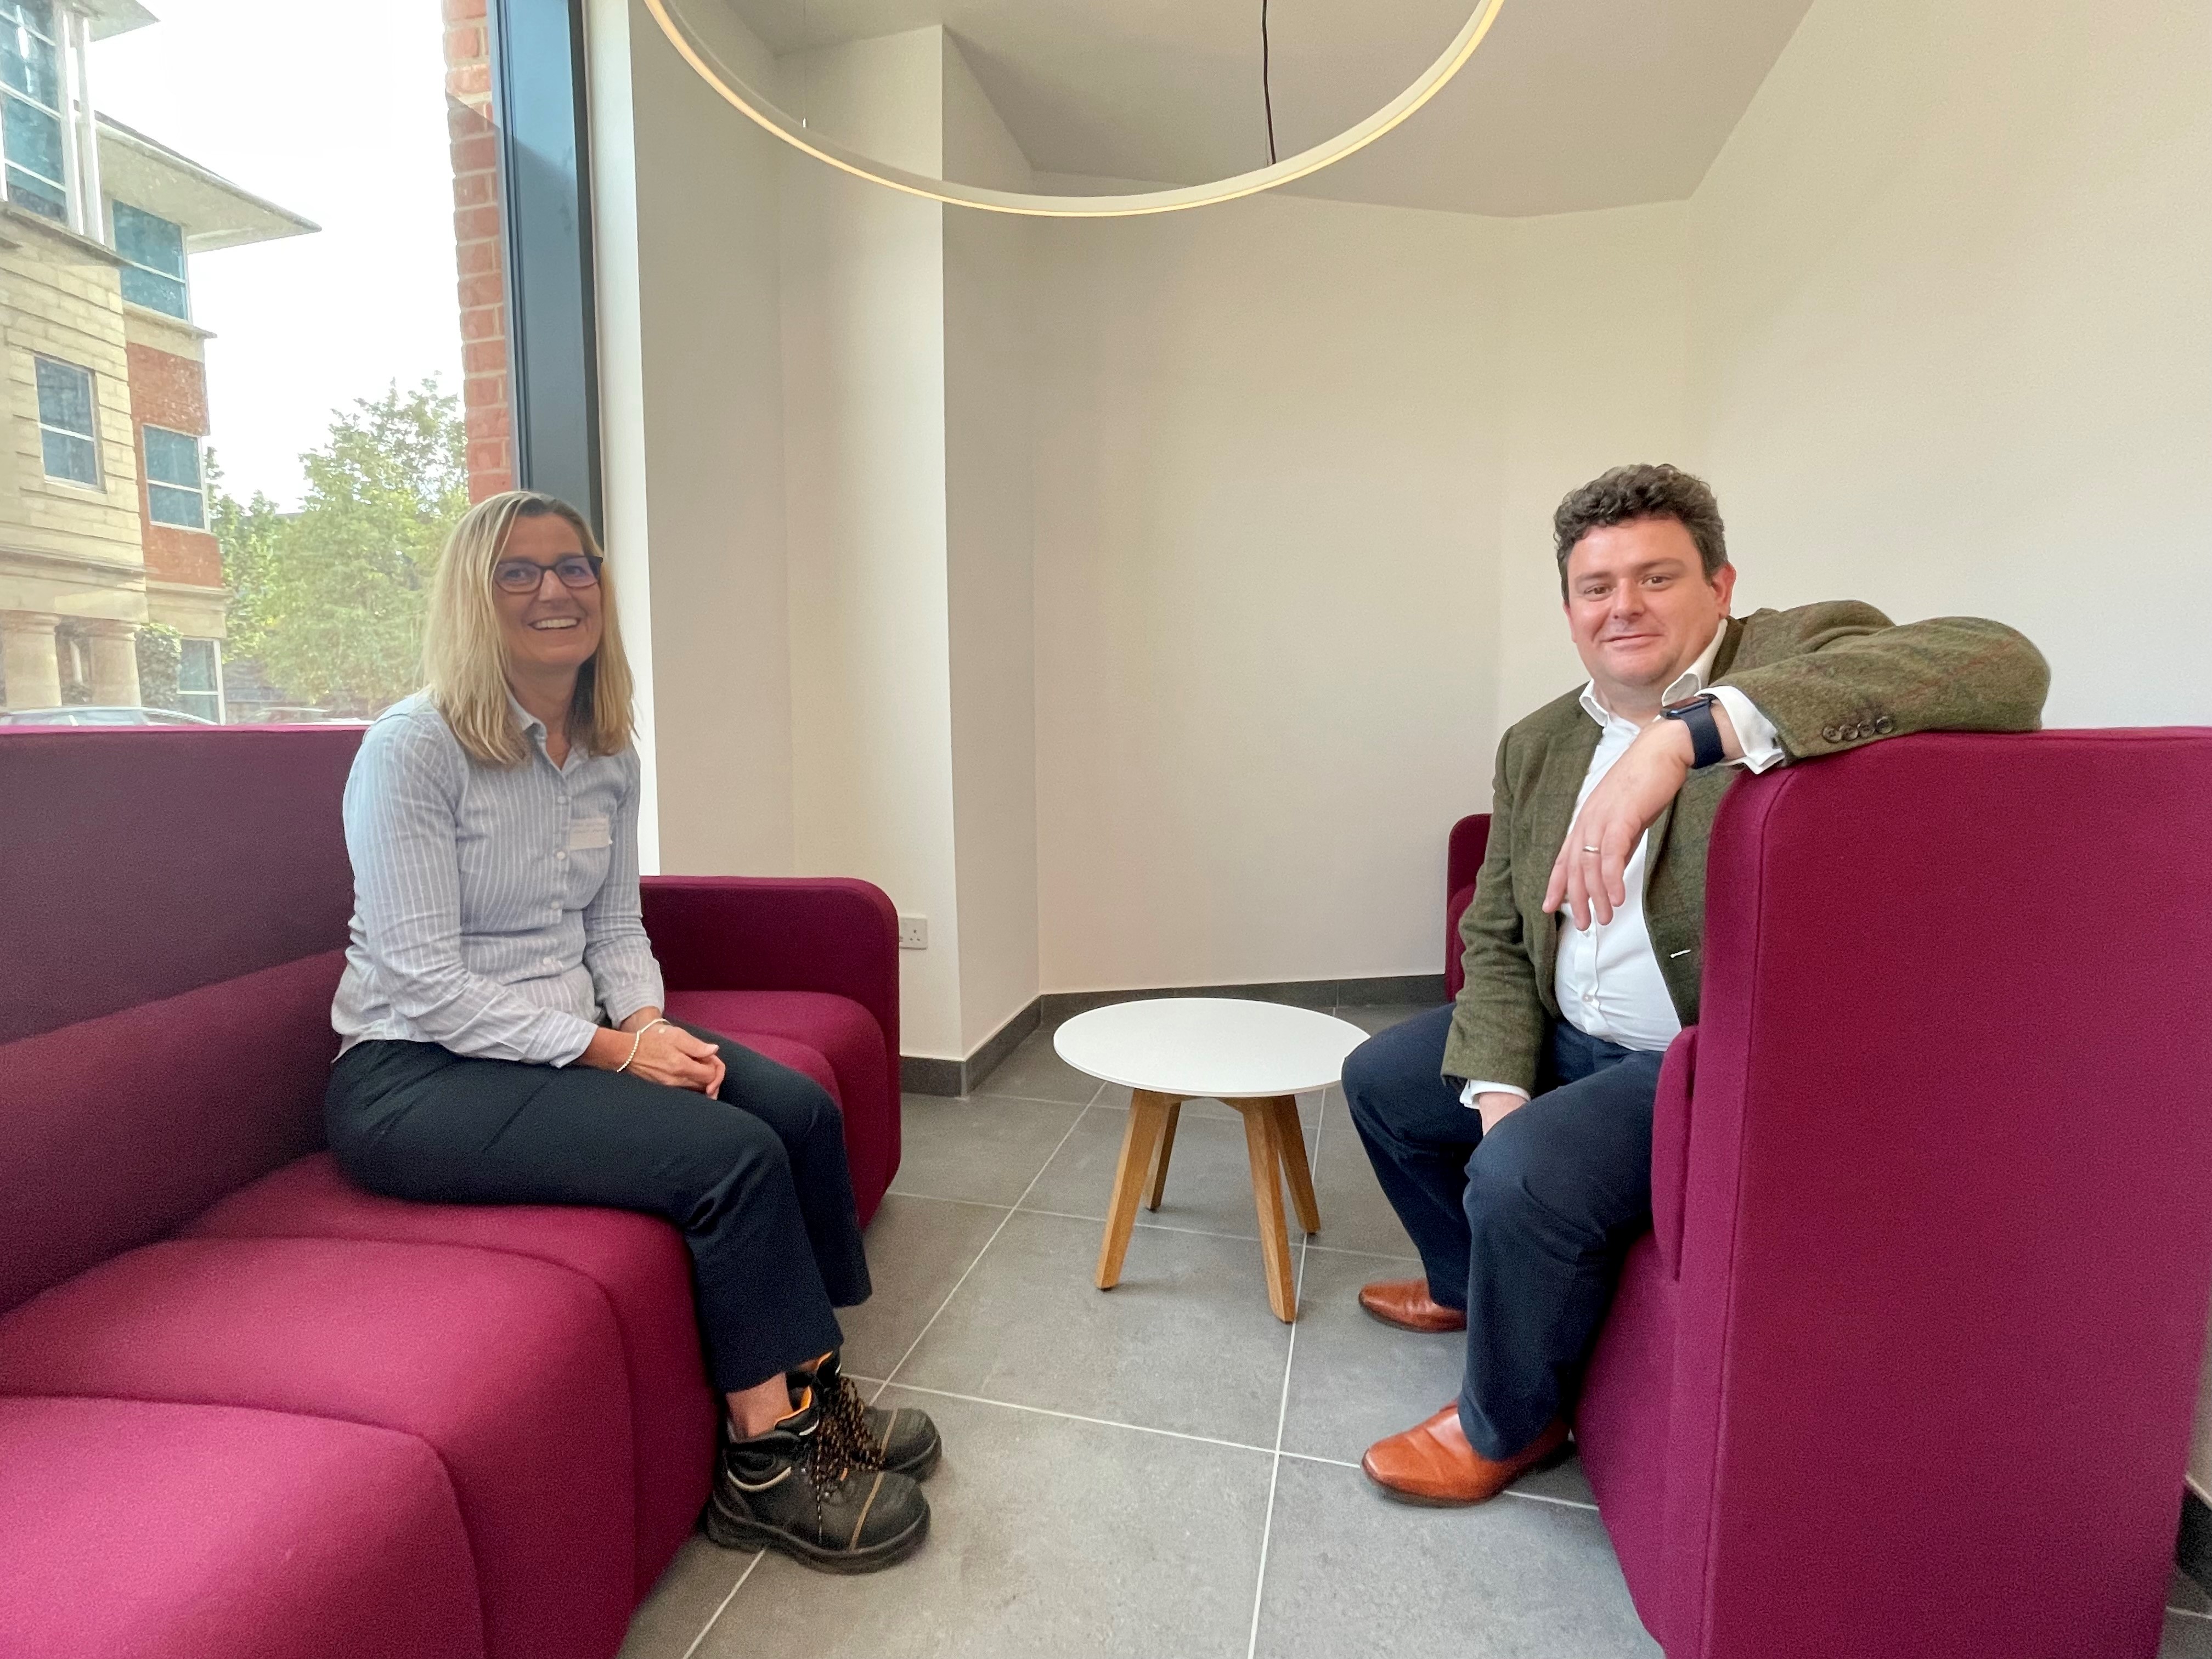 A picture of Alex Williams, Corporate Head of Assets and Regeneration at Runnymede Borough Council and Cllr Nick Prescot, leader of Runnymede Council sat on two purple sofas.